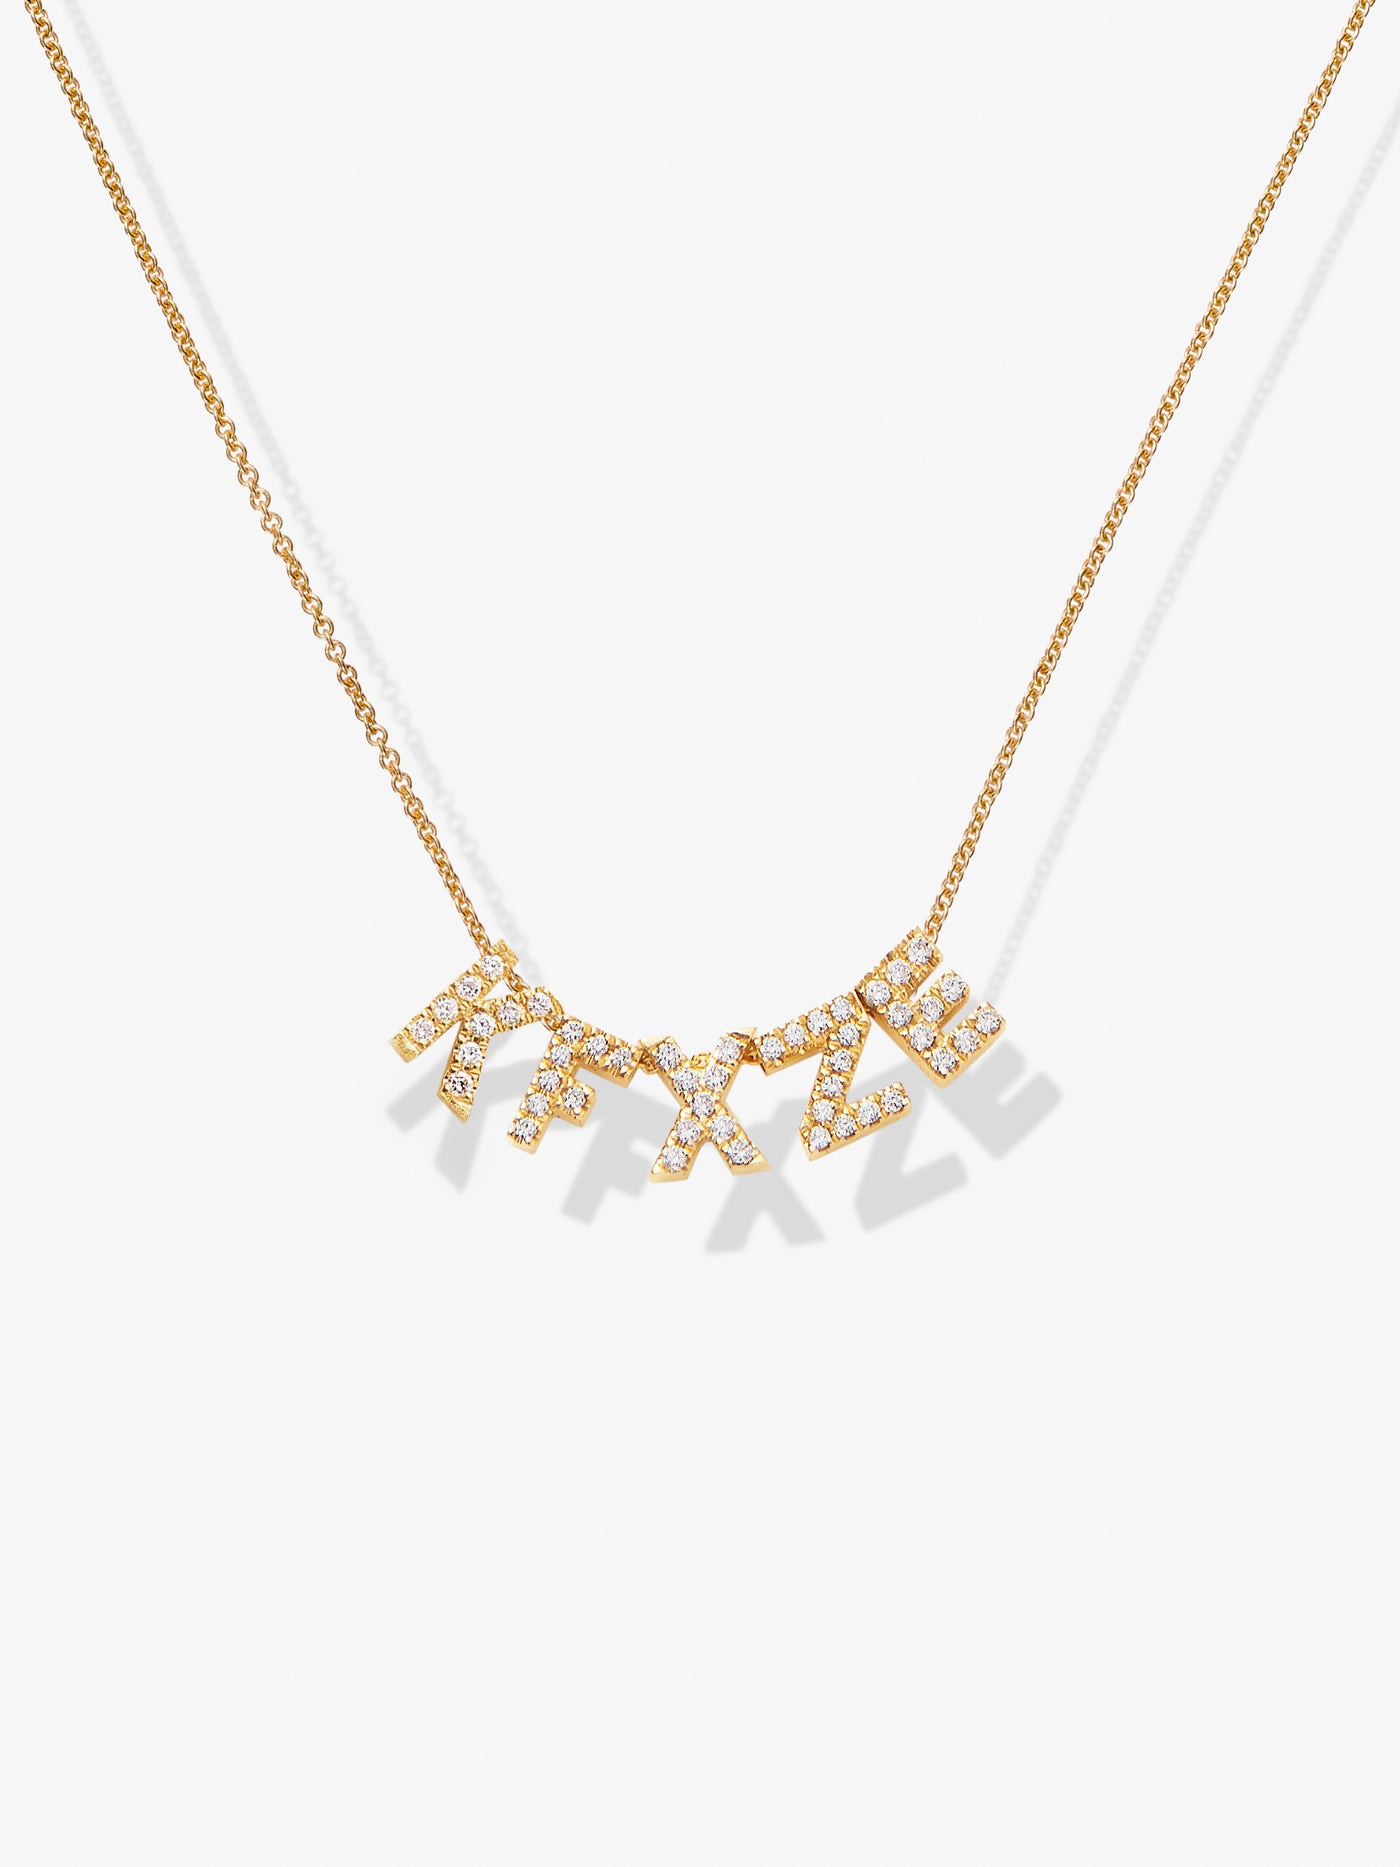 Five Letters Necklace in Diamonds and 18k Gold